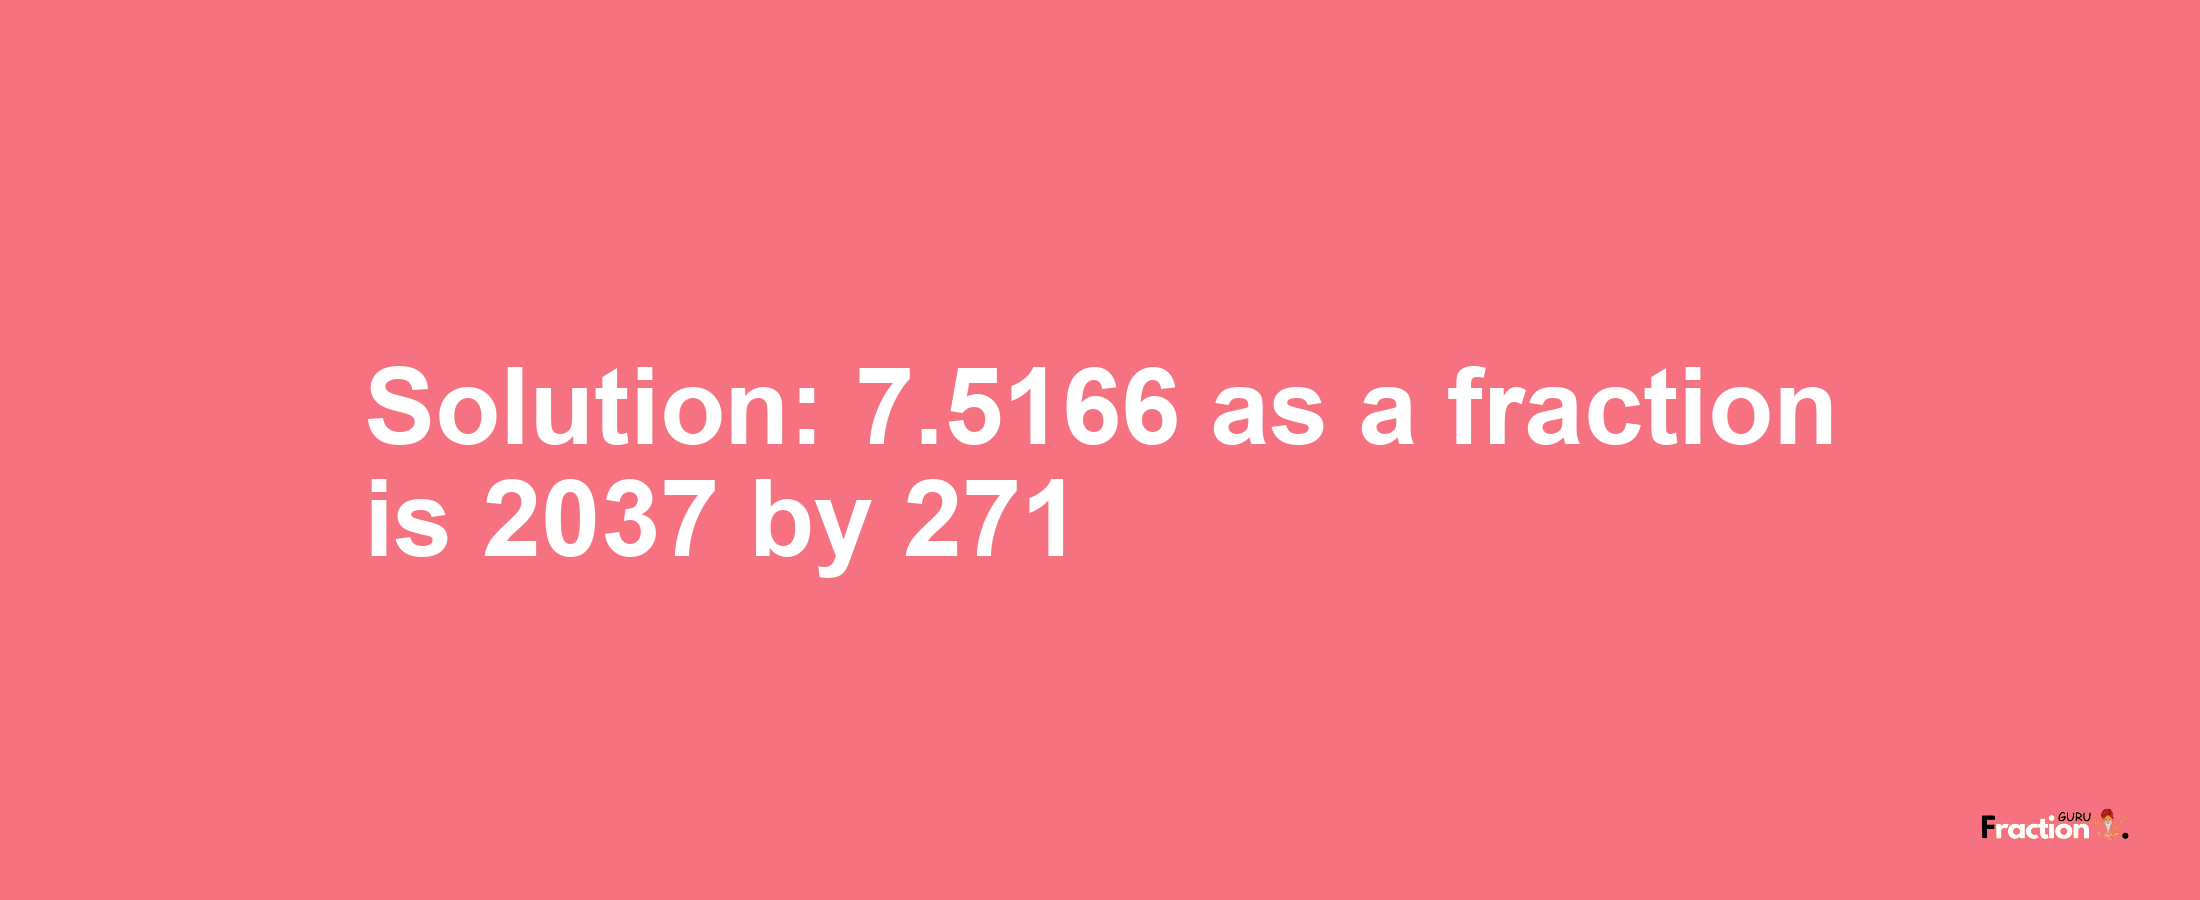 Solution:7.5166 as a fraction is 2037/271